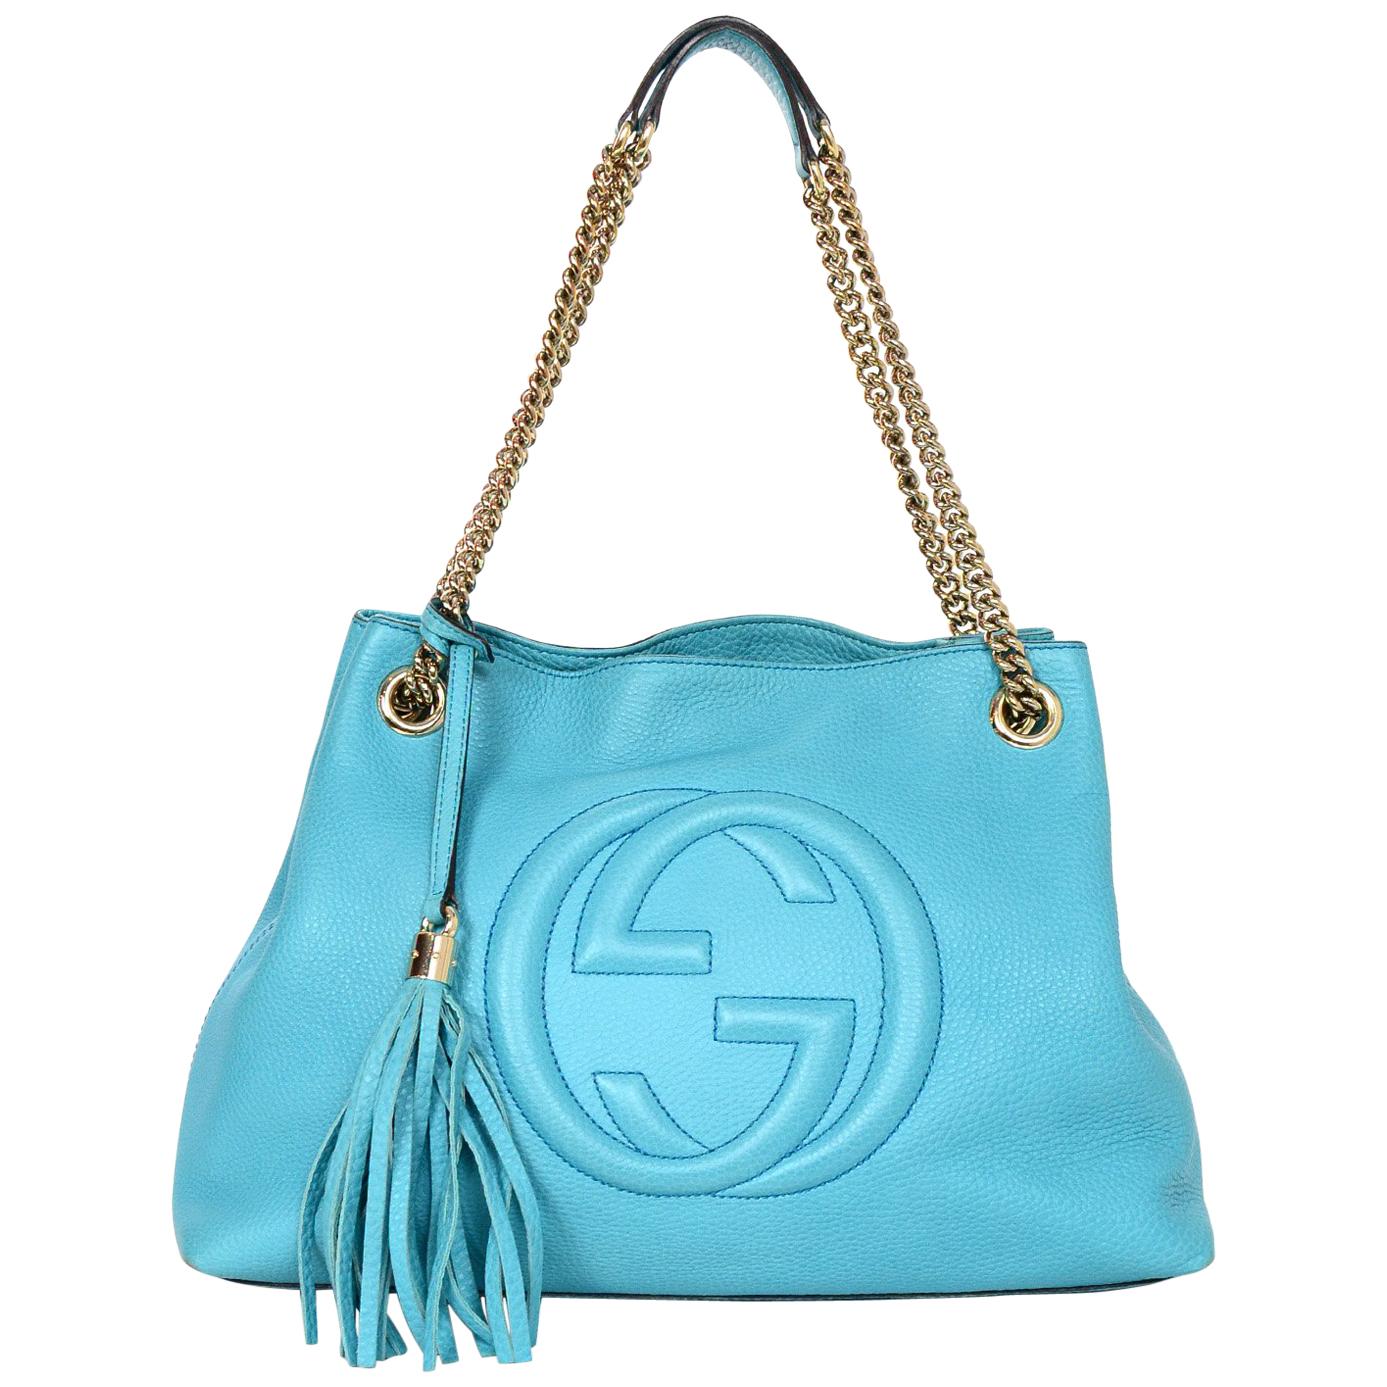 Gucci GG Logo Turquoise Pebbled Leather Soho Chain Tote Tassel Bag